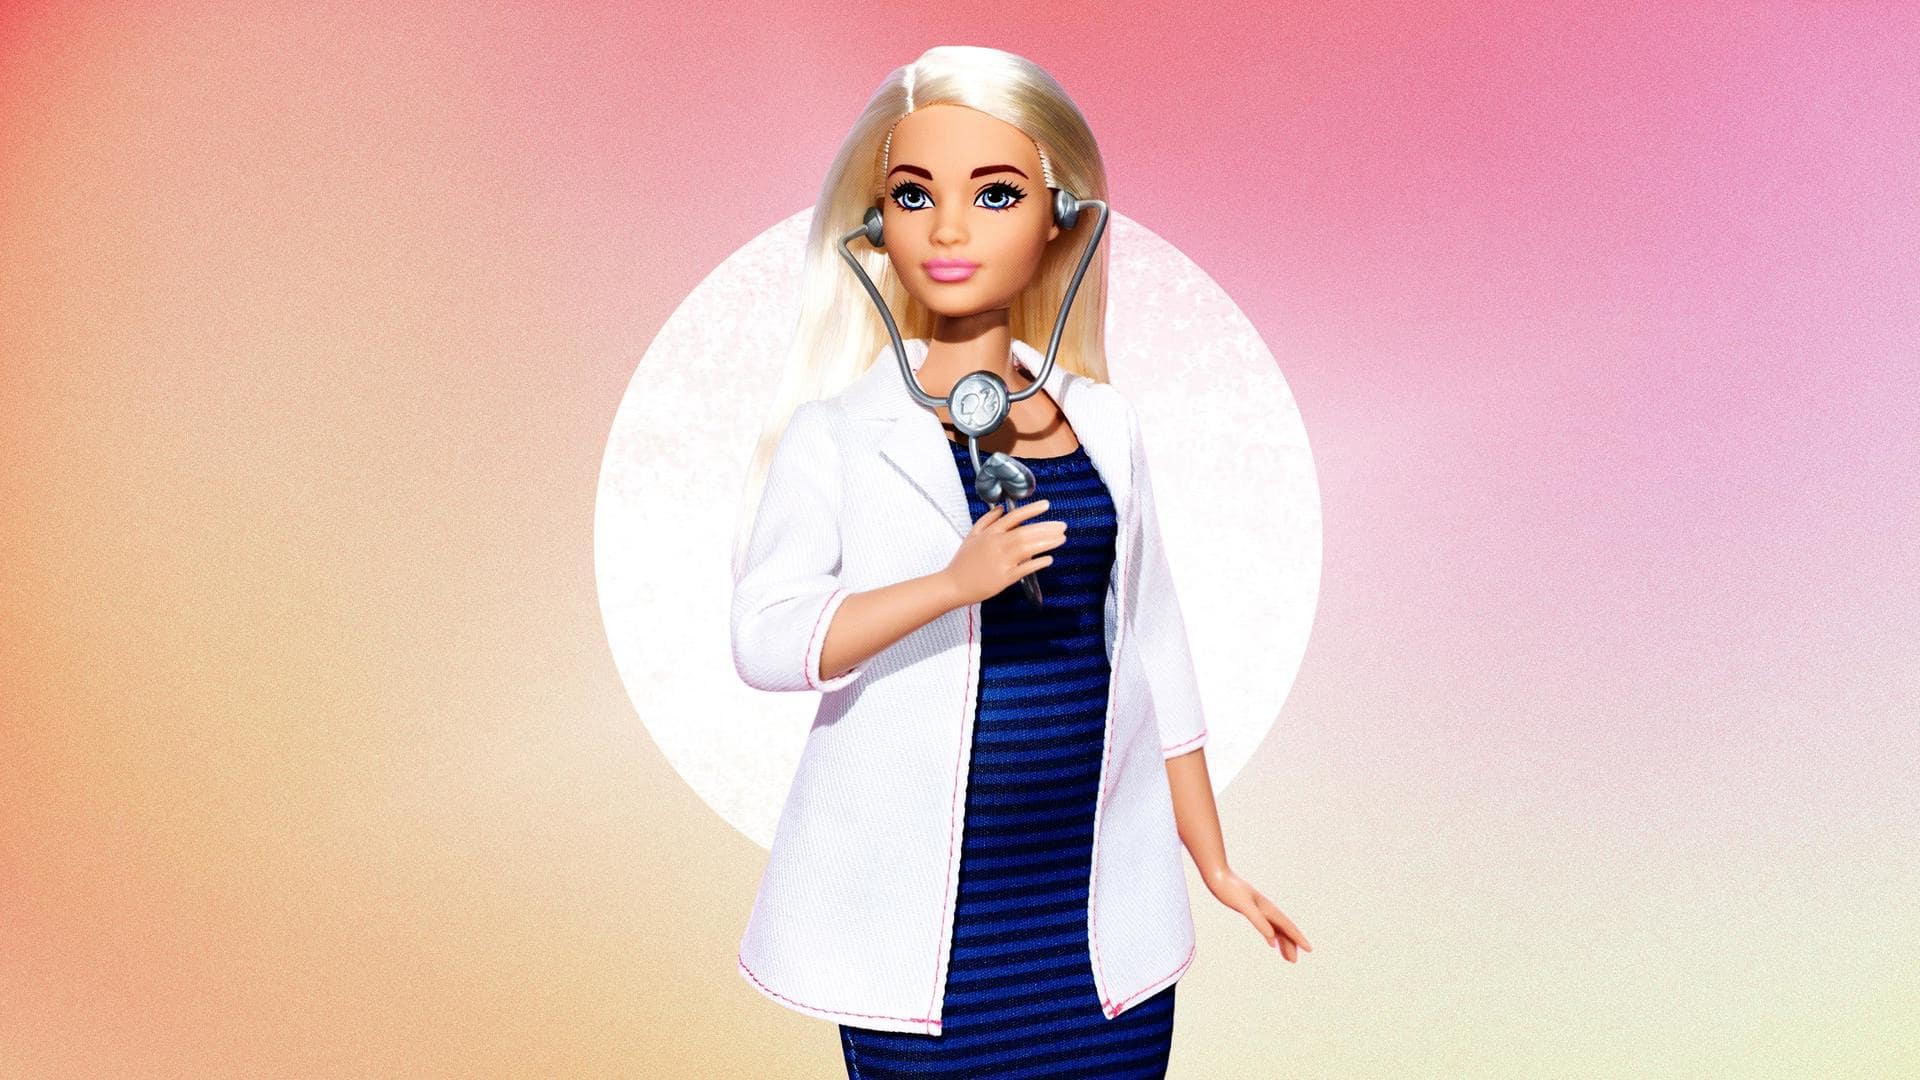 How Barbie became a timeless role model for girls